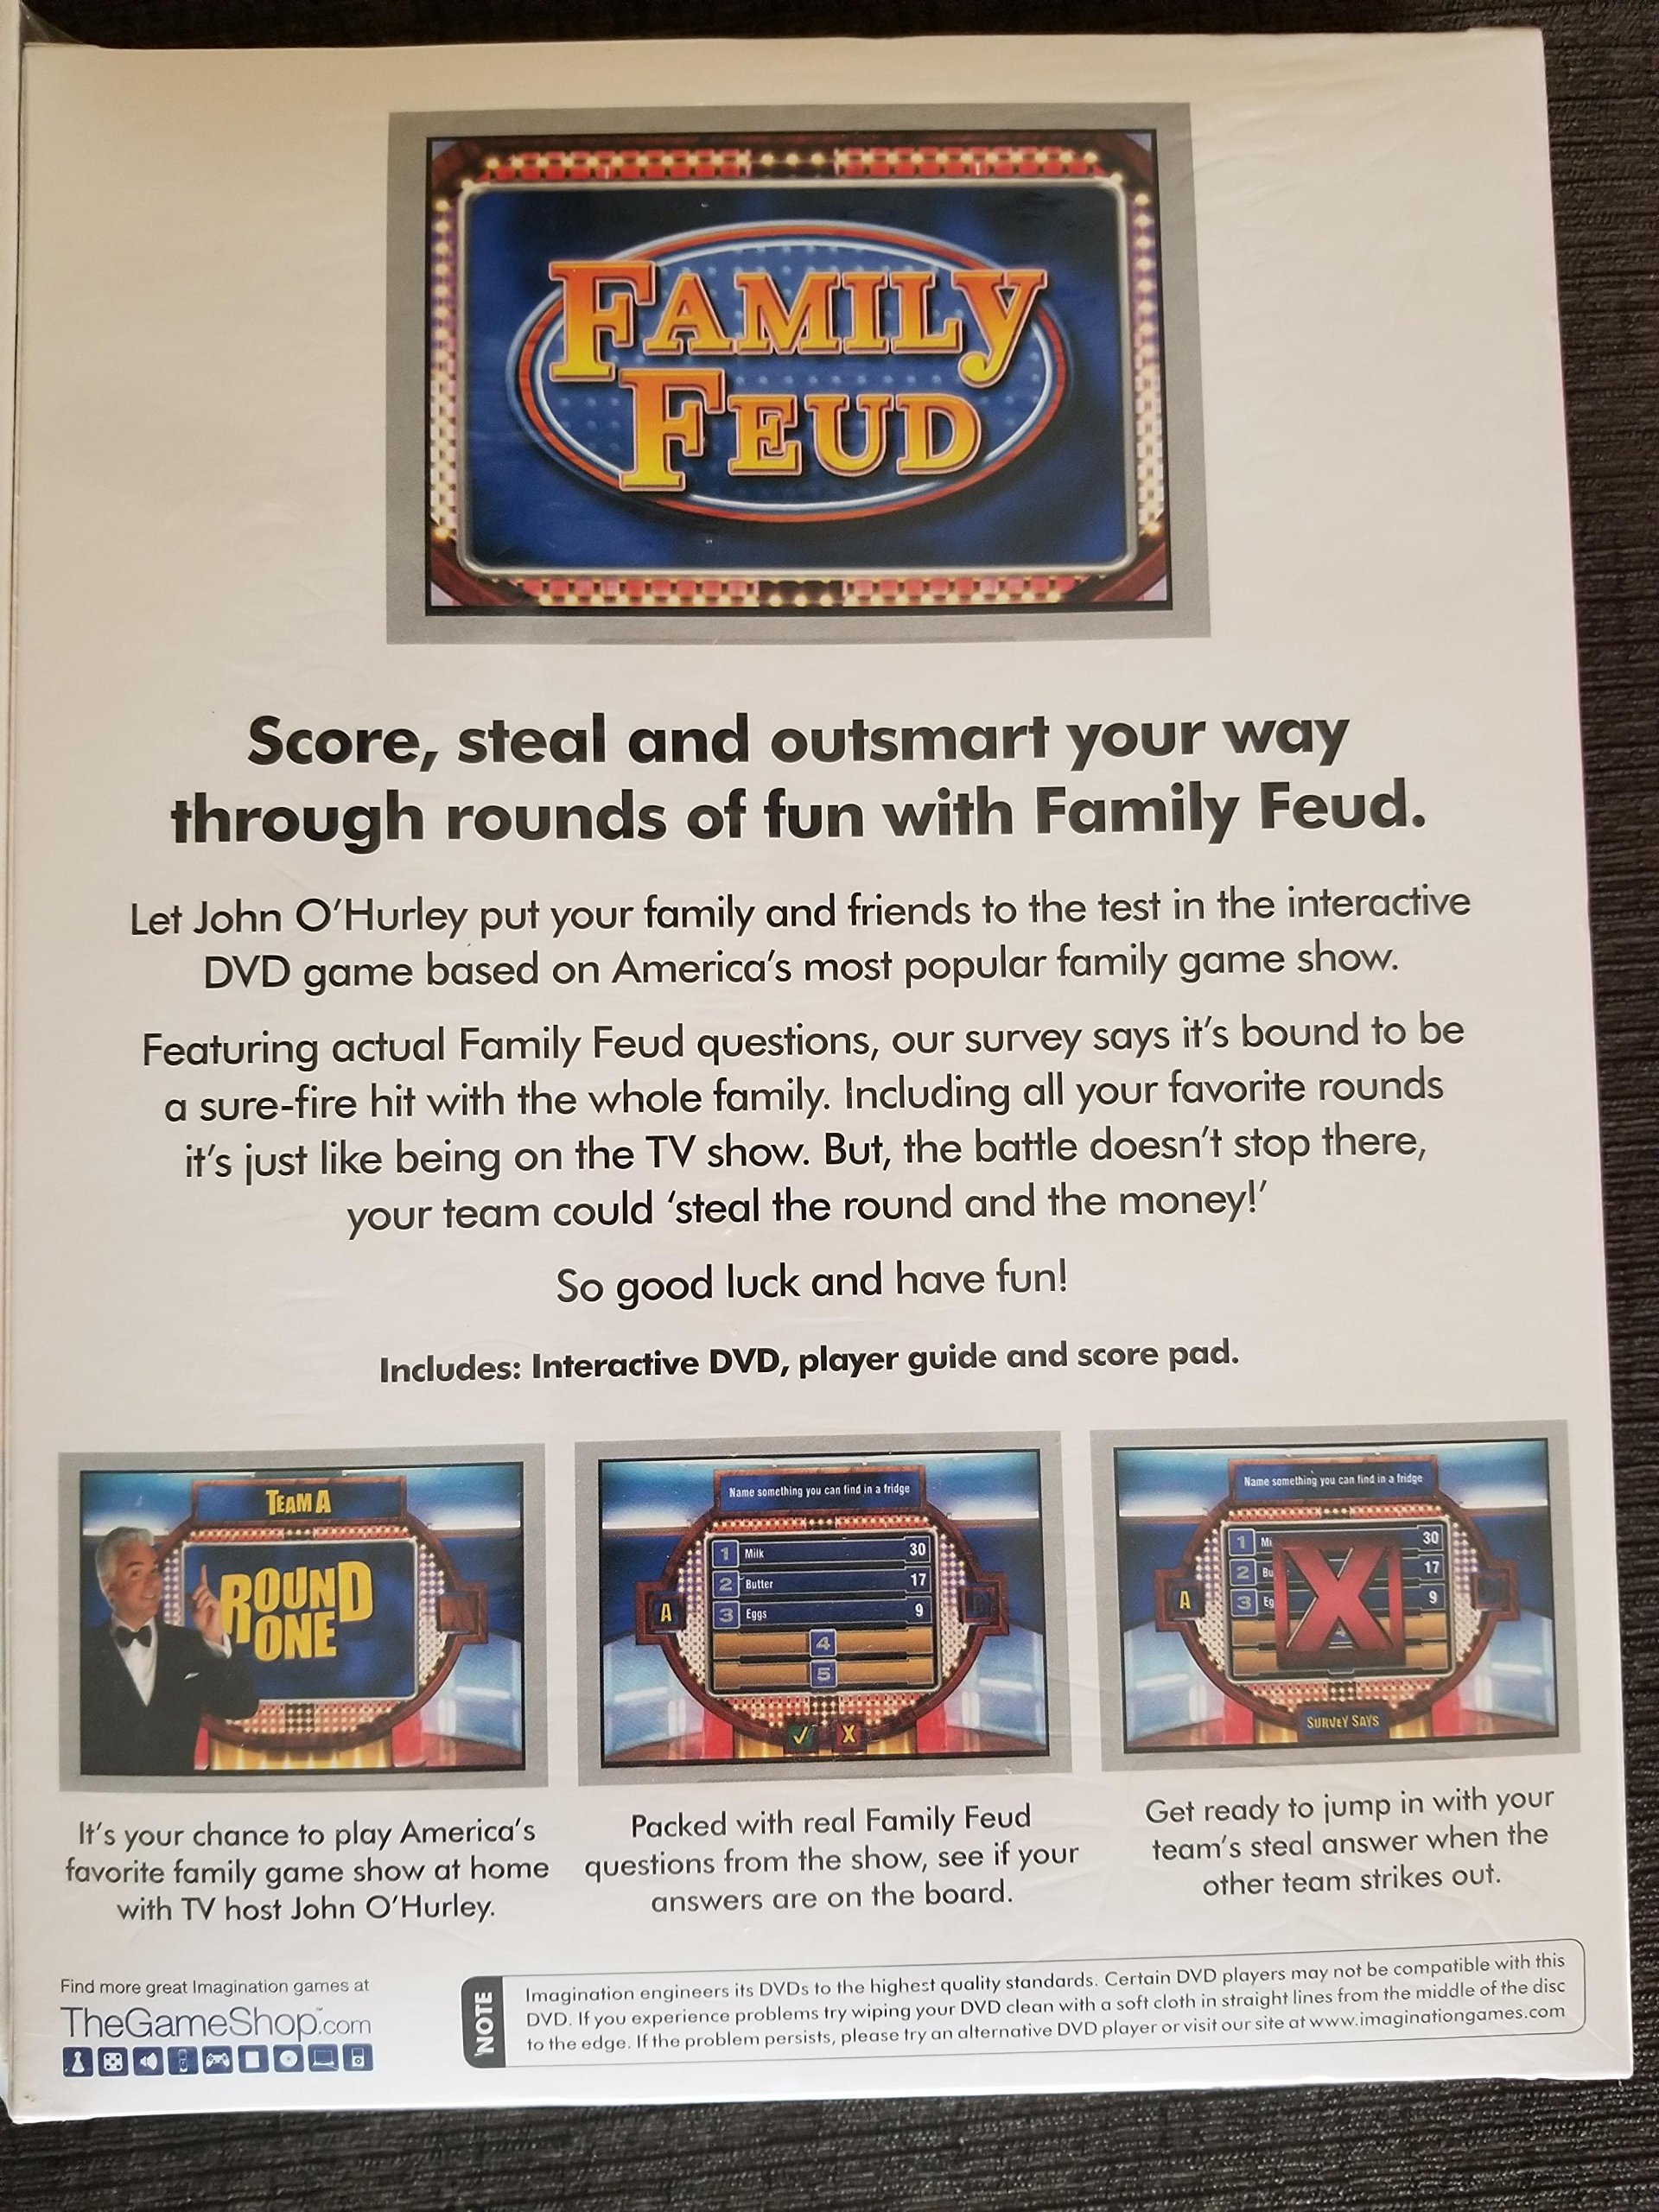 DVD Game 3 Pack - Family Feud - Deal or No Deal - Who Wants to Be a Millionaire